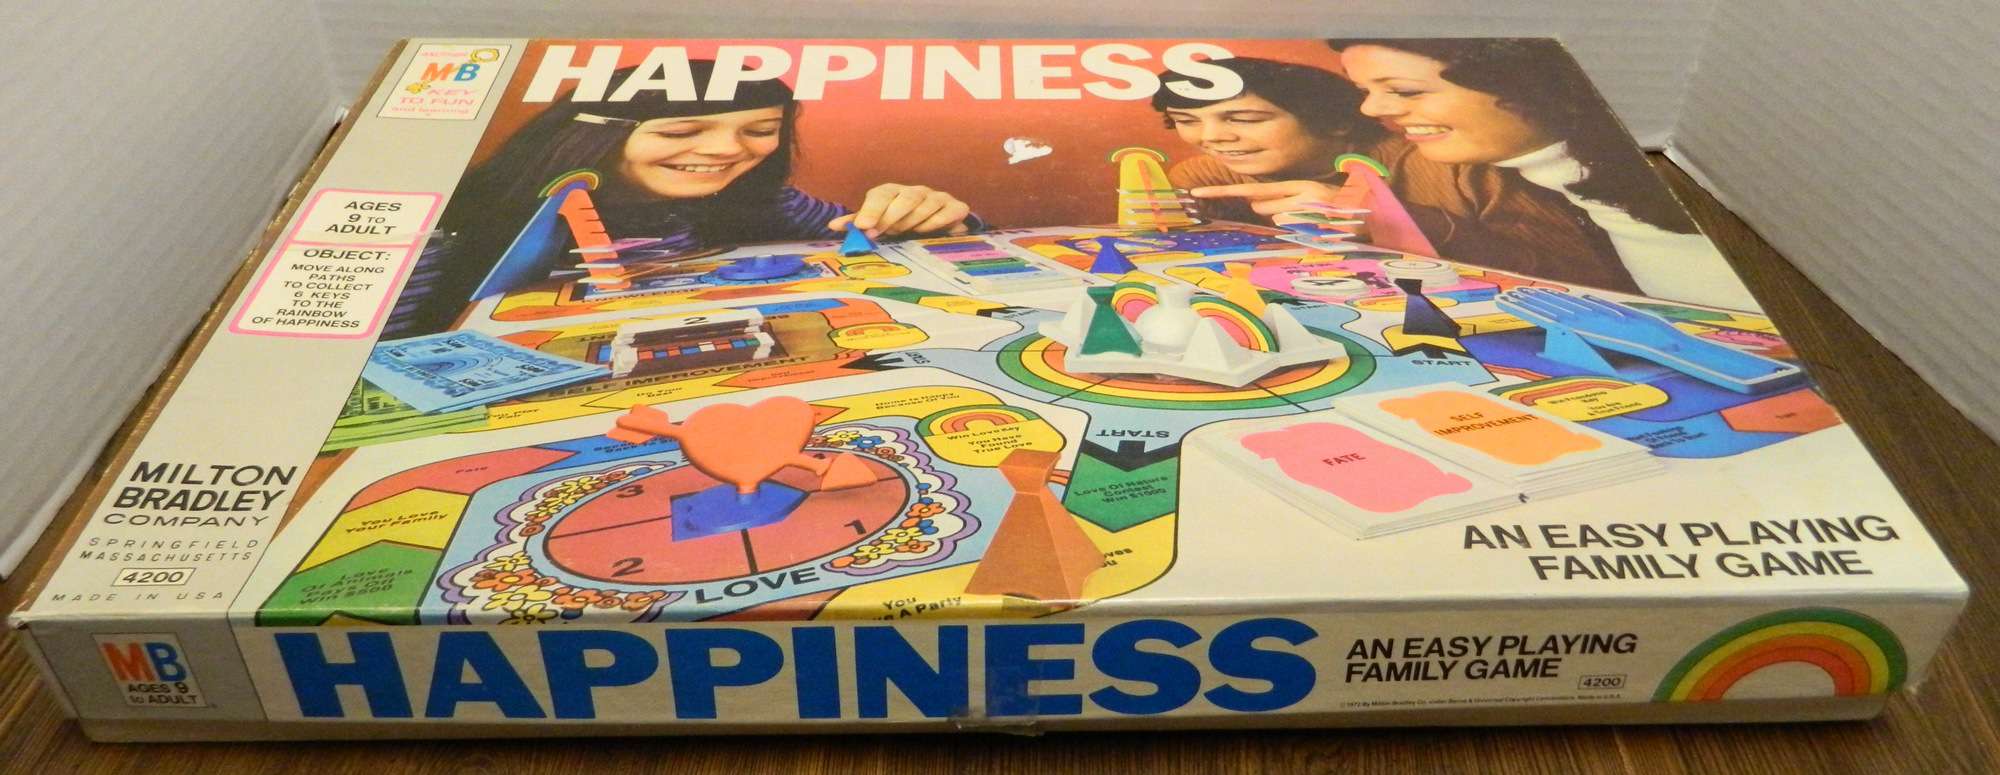 Happiness Board Game Review and Instructions